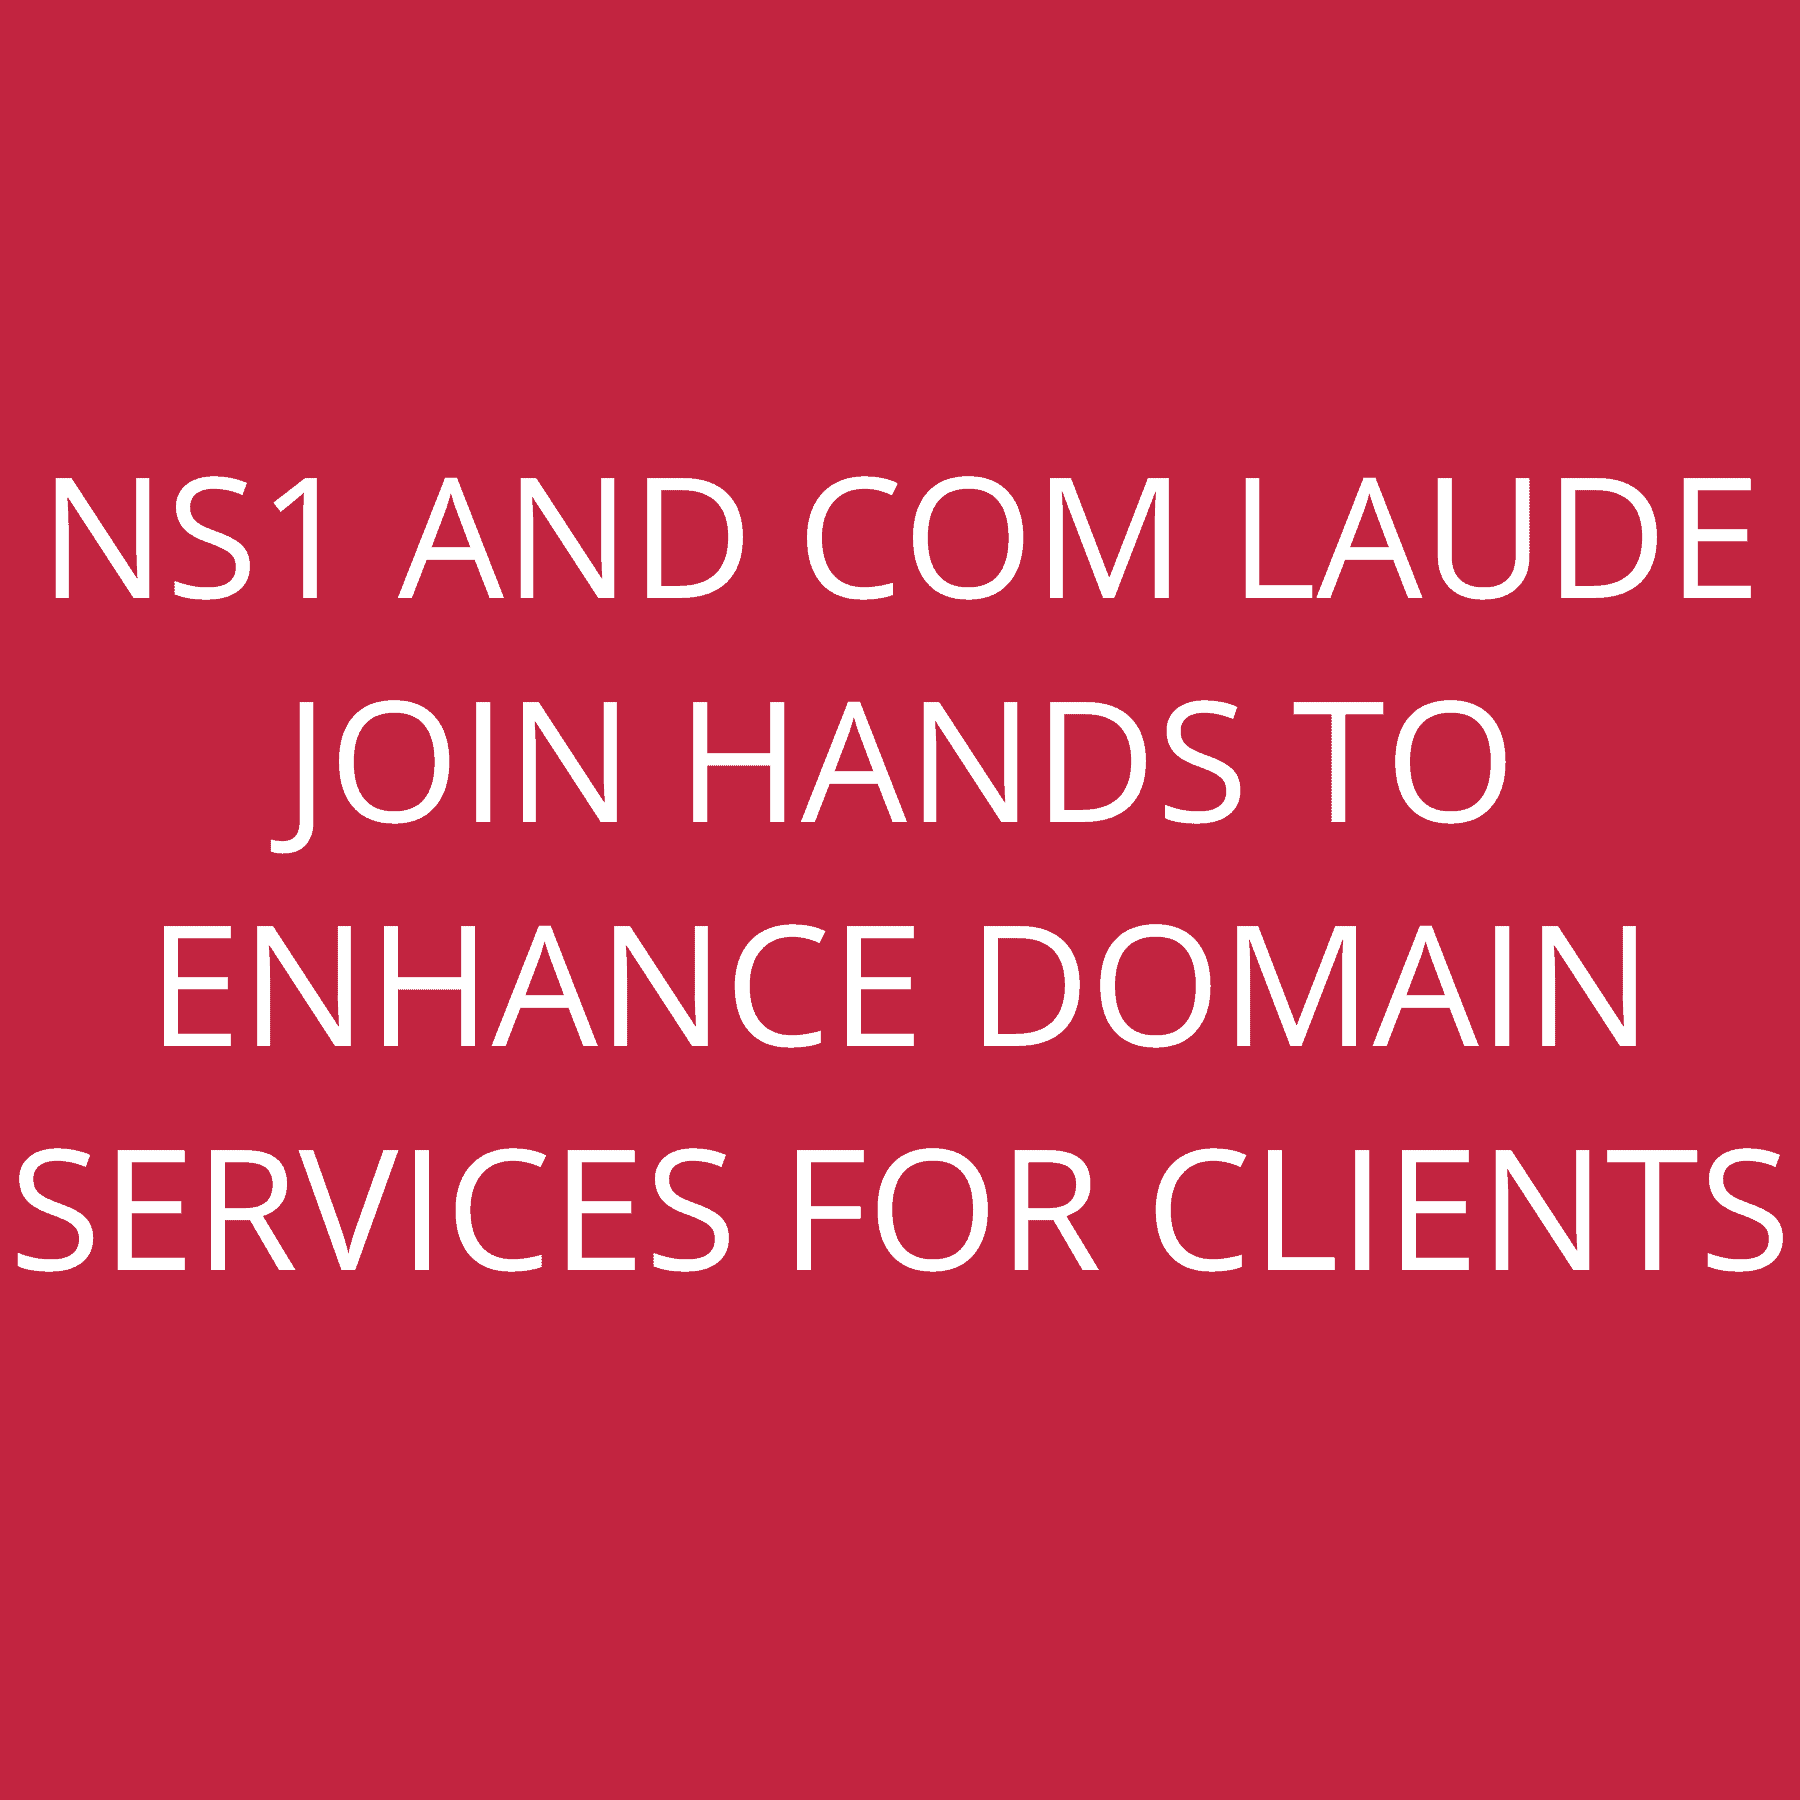 NS1 and Com Laude join hands to enhance Domain Services for clients